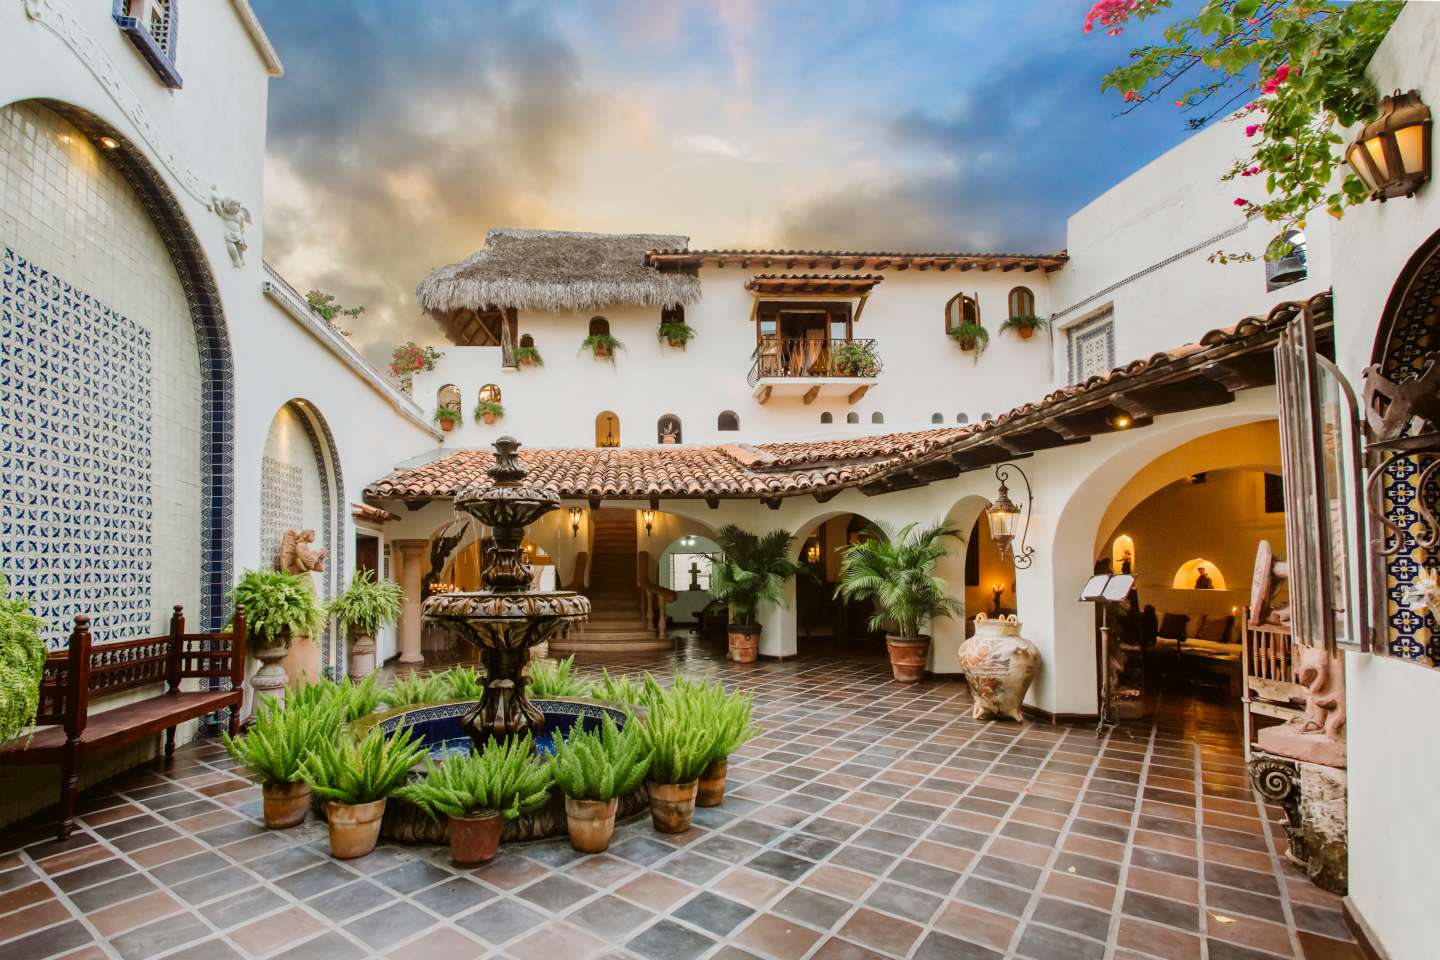 Concierge Services at Hacienda San Angel are located by the Courtyard with Fountain.